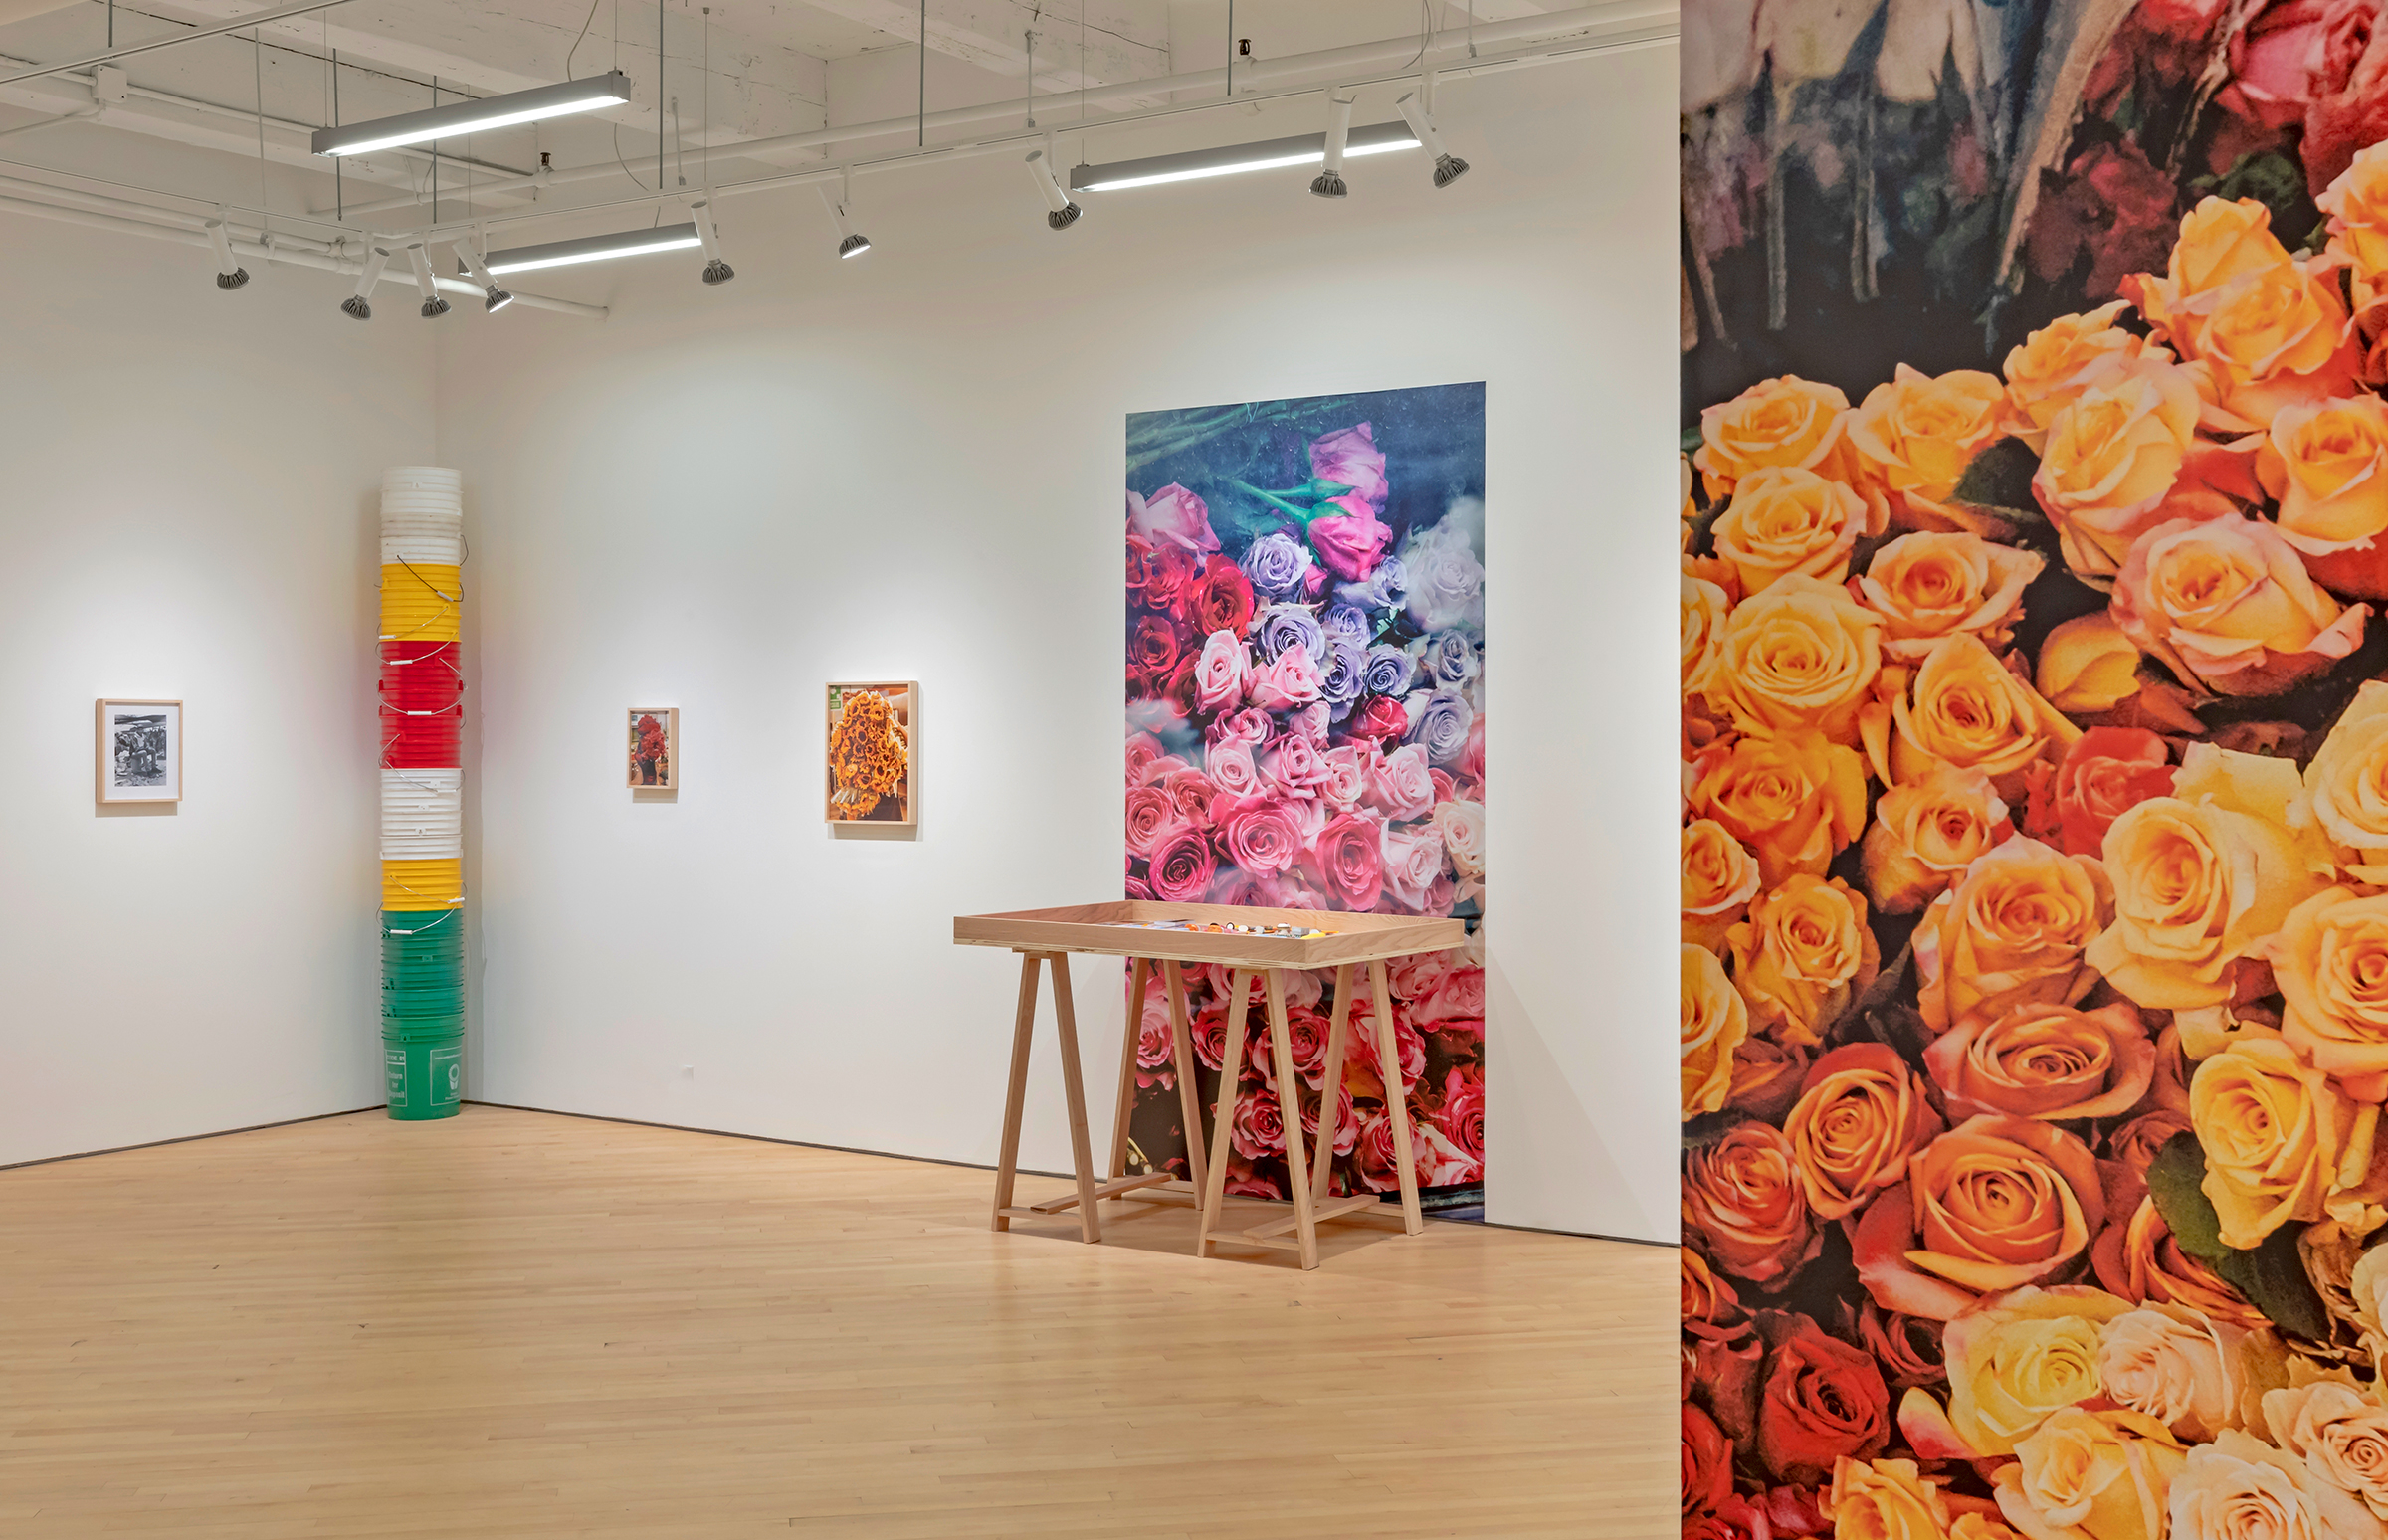     Installation view of Luis Mora, Say it with Flowers, Oct. 17–Nov. 30, 2019, CONTACT Gallery. Documentation photo by Toni Hafkenscheid.

